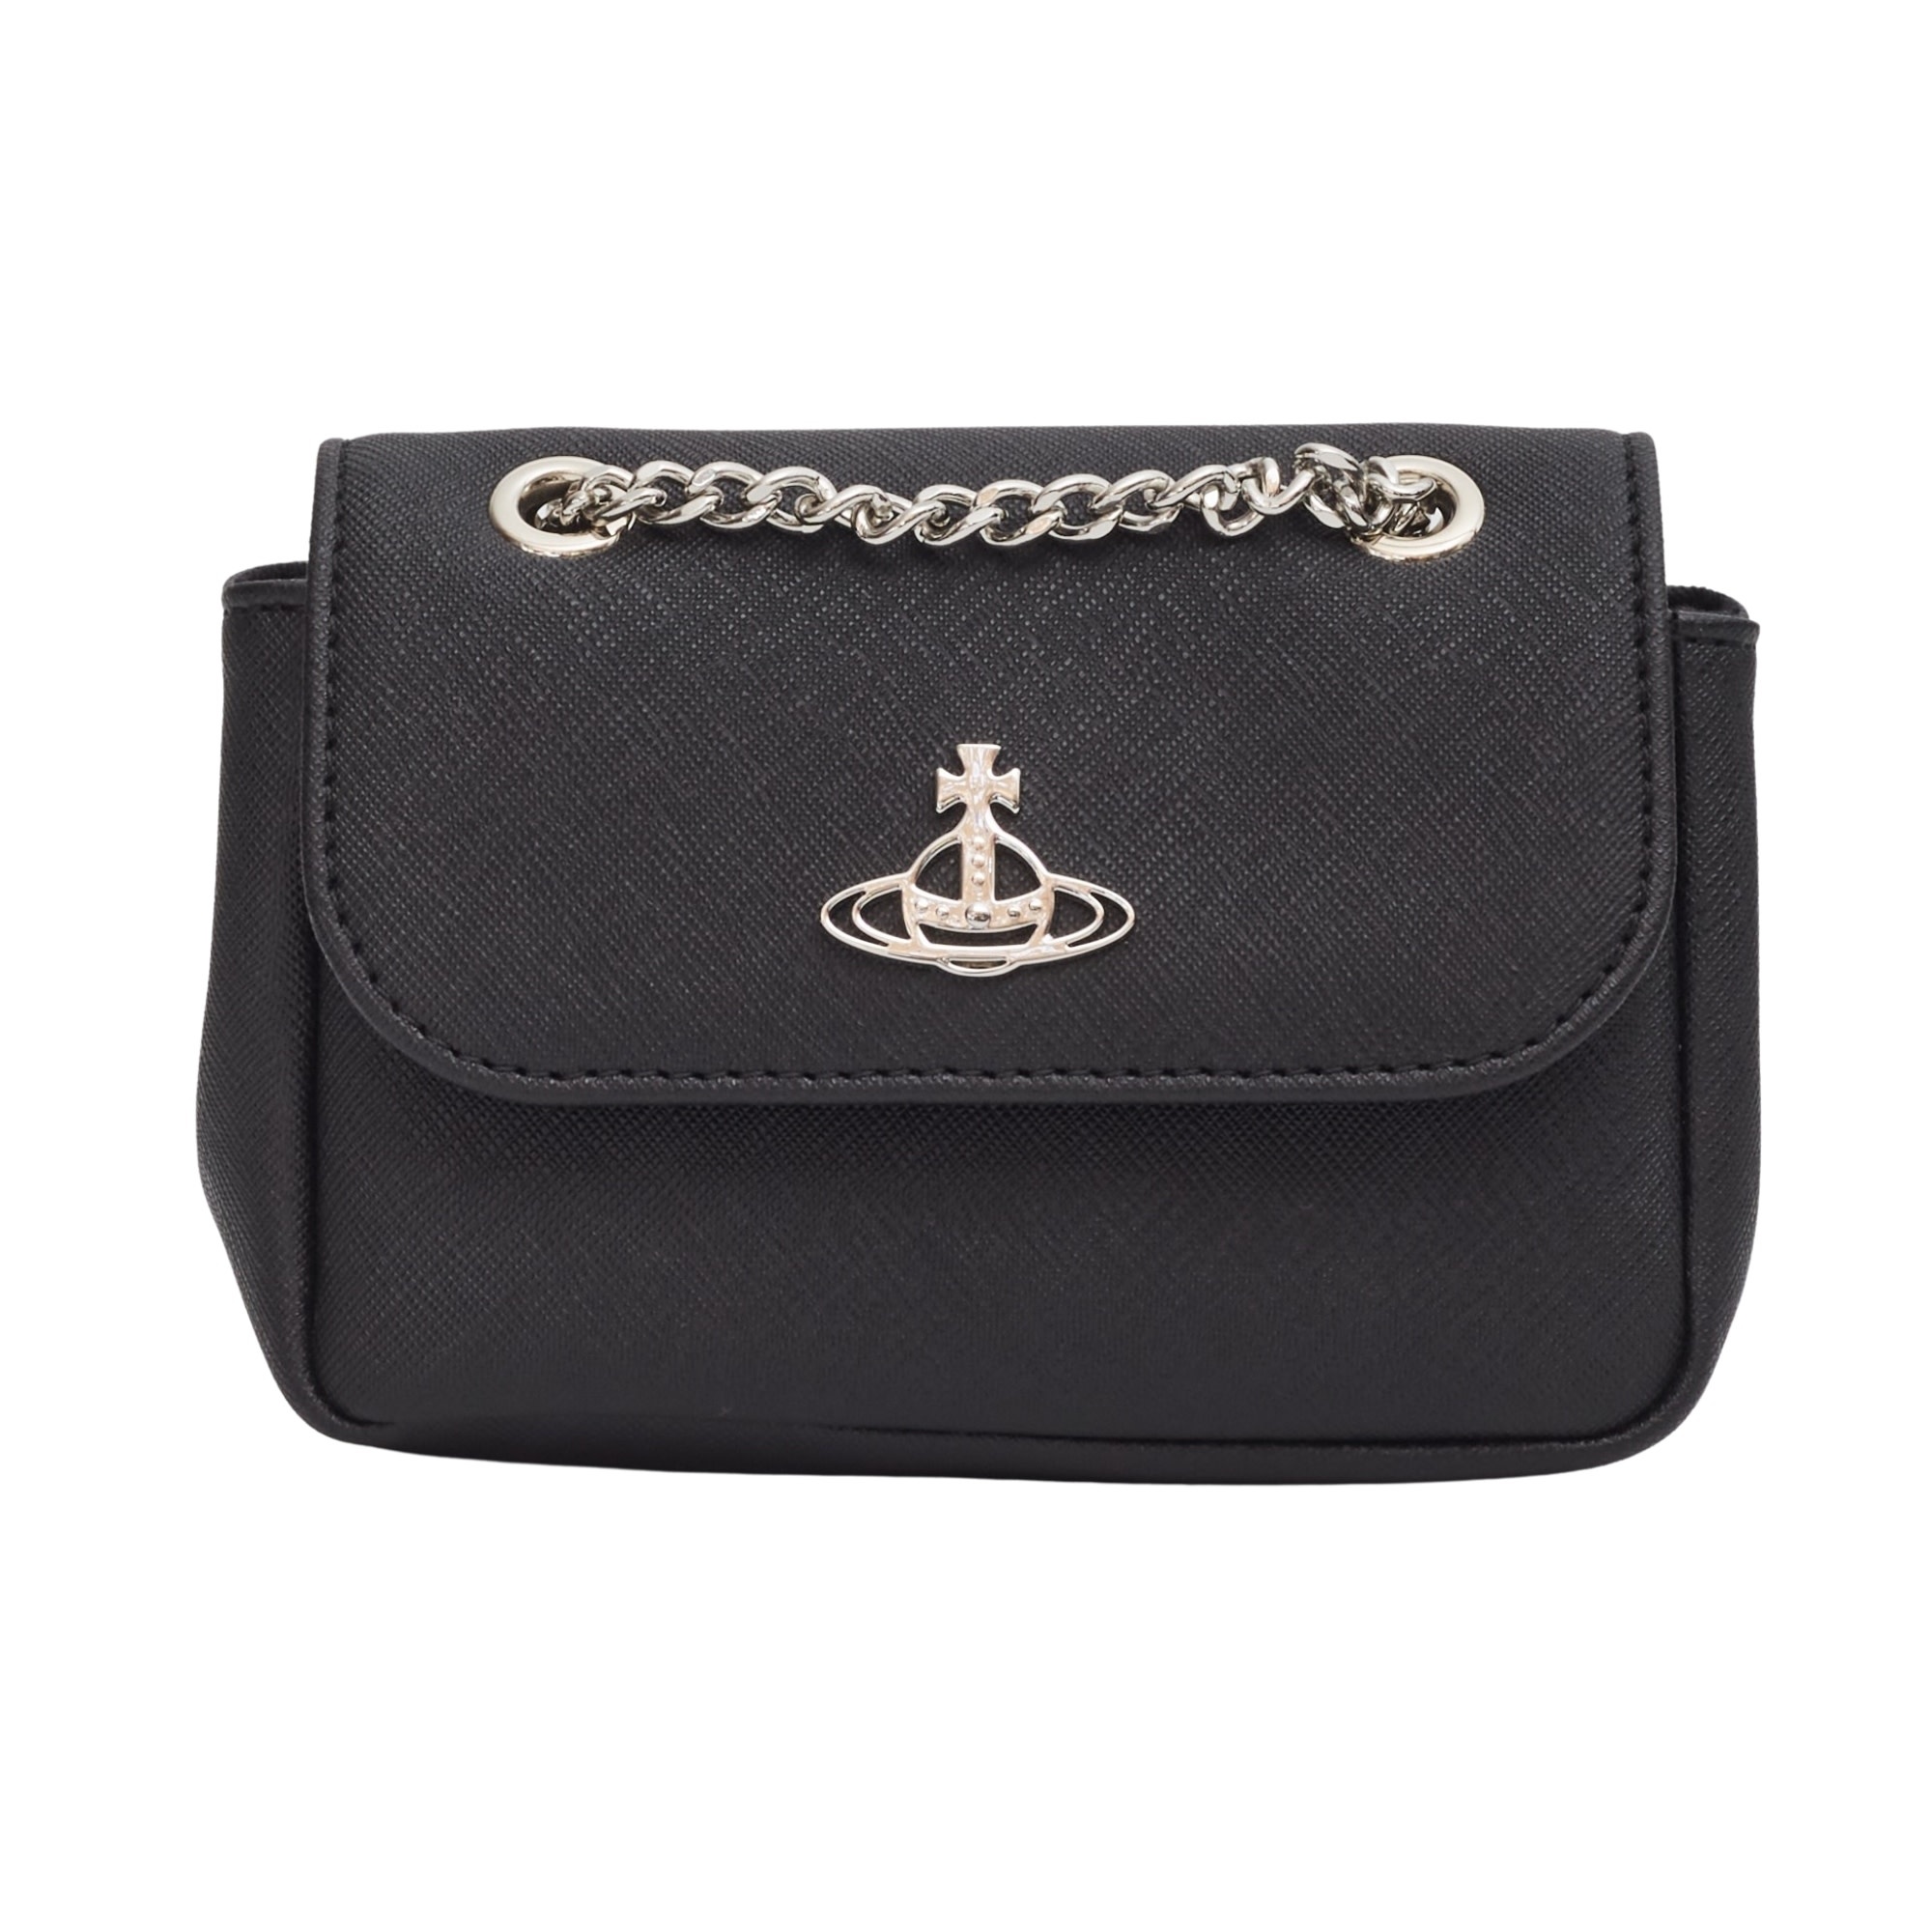 VIVIENNE WESTWOOD FLAP BAG WITH CHAIN DERBY PURSE SMALL